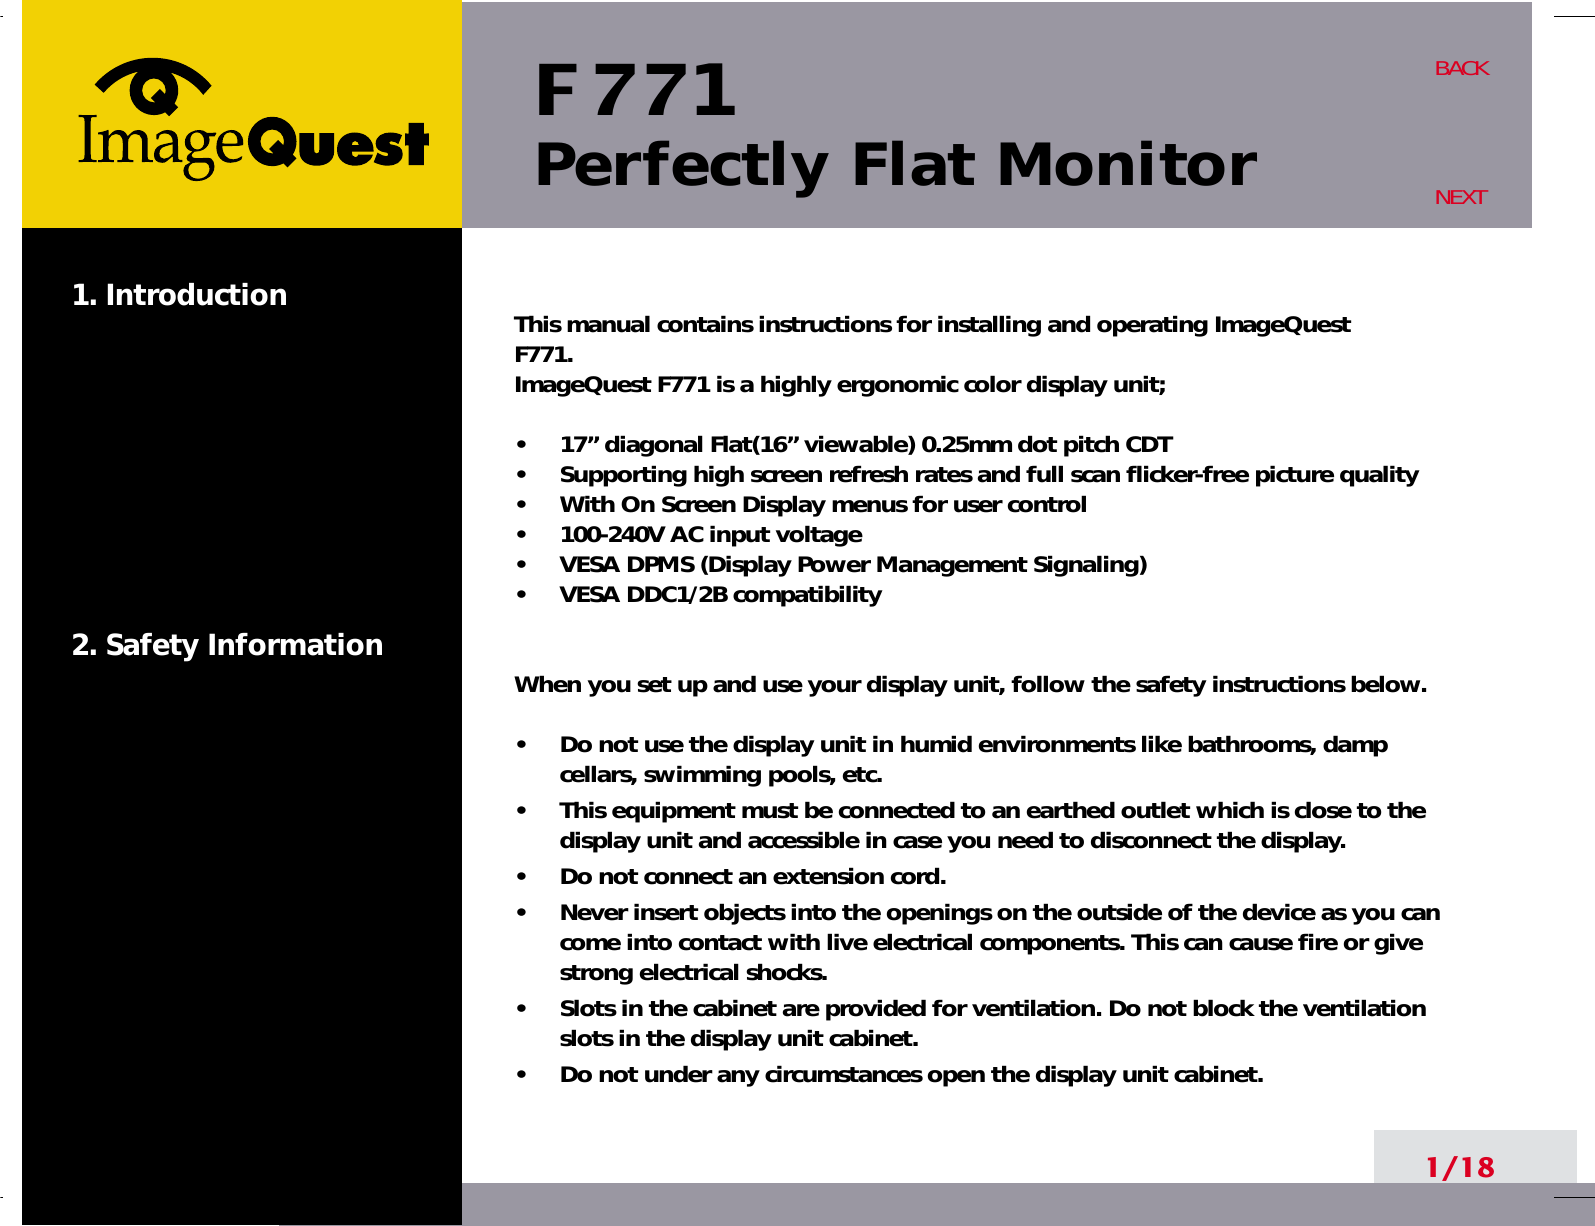 F 771Perfectly Flat Monitor1. Introduction2. Safety Information1/18BACKNEXTThis manual contains instructions for installing and operating ImageQuestF771. ImageQuest F771 is a highly ergonomic color display unit; •     17” diagonal Flat(16” viewable) 0.25mm dot pitch CDT•     Supporting high screen refresh rates and full scan flicker-free picture quality•     With On Screen Display menus for user control•     100-240V AC input voltage•     VESA DPMS (Display Power Management Signaling)•     VESA DDC1/2B compatibilityWhen you set up and use your display unit, follow the safety instructions below.•     Do not use the display unit in humid environments like bathrooms, dampcellars, swimming pools, etc.•     This equipment must be connected to an earthed outlet which is close to thedisplay unit and accessible in case you need to disconnect the display.•     Do not connect an extension cord.•     Never insert objects into the openings on the outside of the device as you cancome into contact with live electrical components. This can cause fire or givestrong electrical shocks.•     Slots in the cabinet are provided for ventilation. Do not block the ventilationslots in the display unit cabinet.•     Do not under any circumstances open the display unit cabinet.